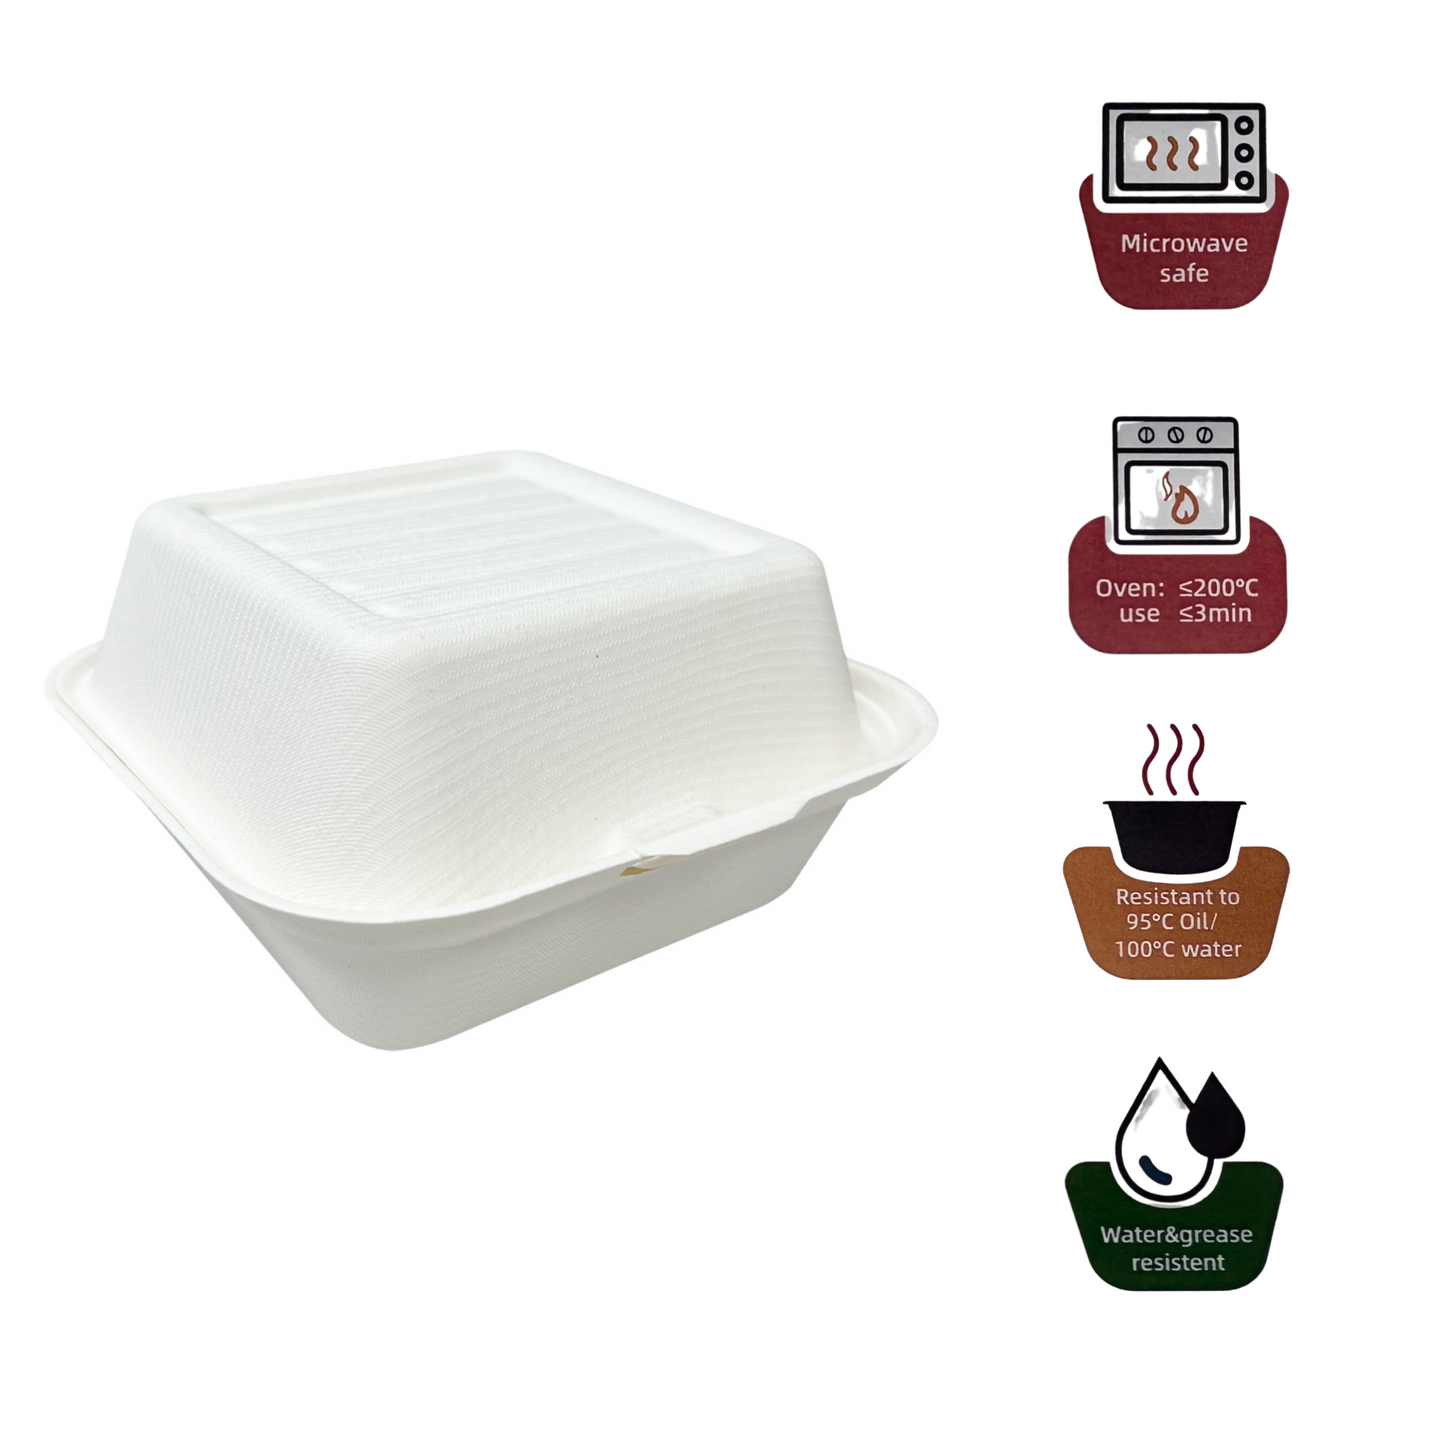 500 Pcs, 6x6x3'', 1-Compartment, Sugarcane Clamshell Food Container